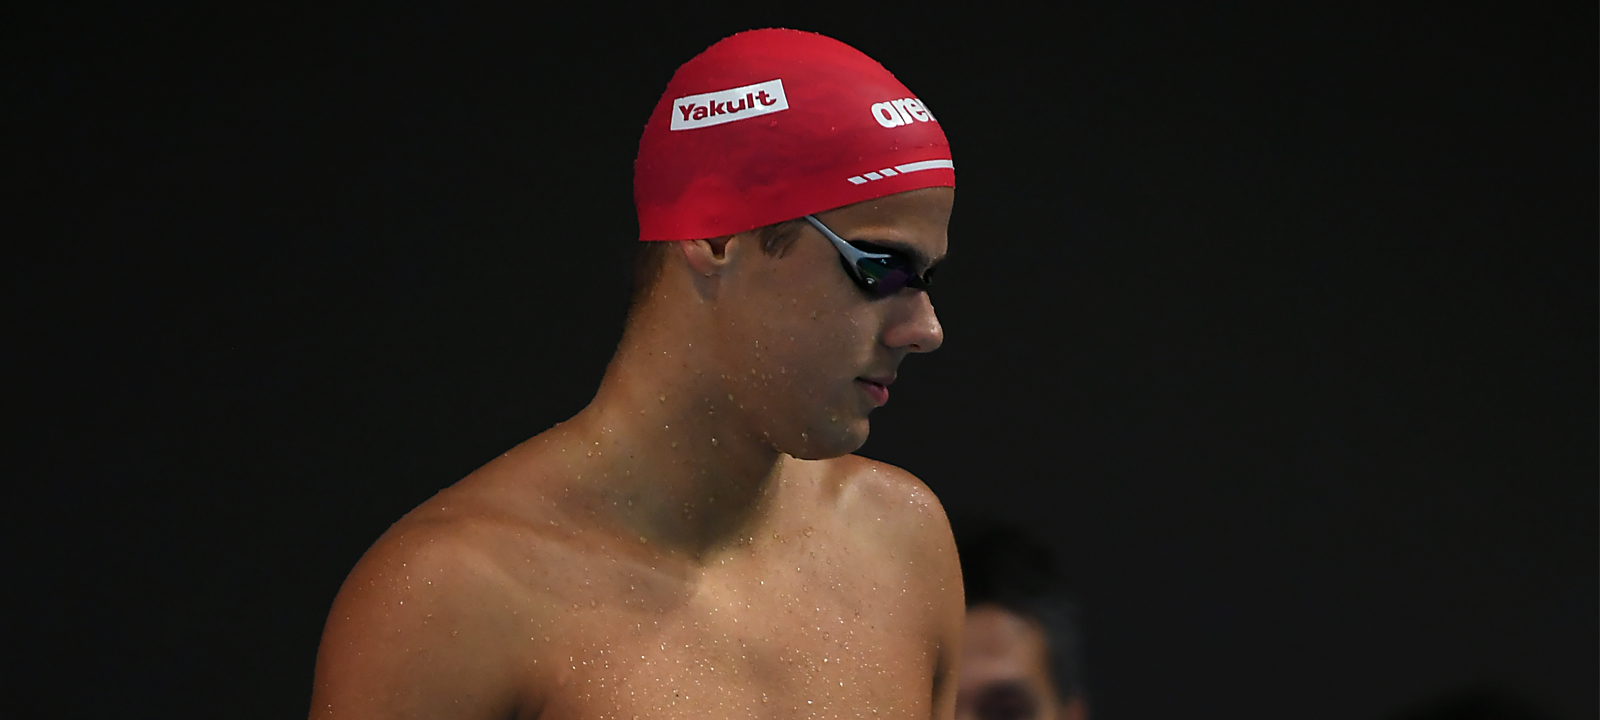 Noe Ponti Swims 1:54.75 200 Fly In Prelims, Breaks His Own Swiss Record